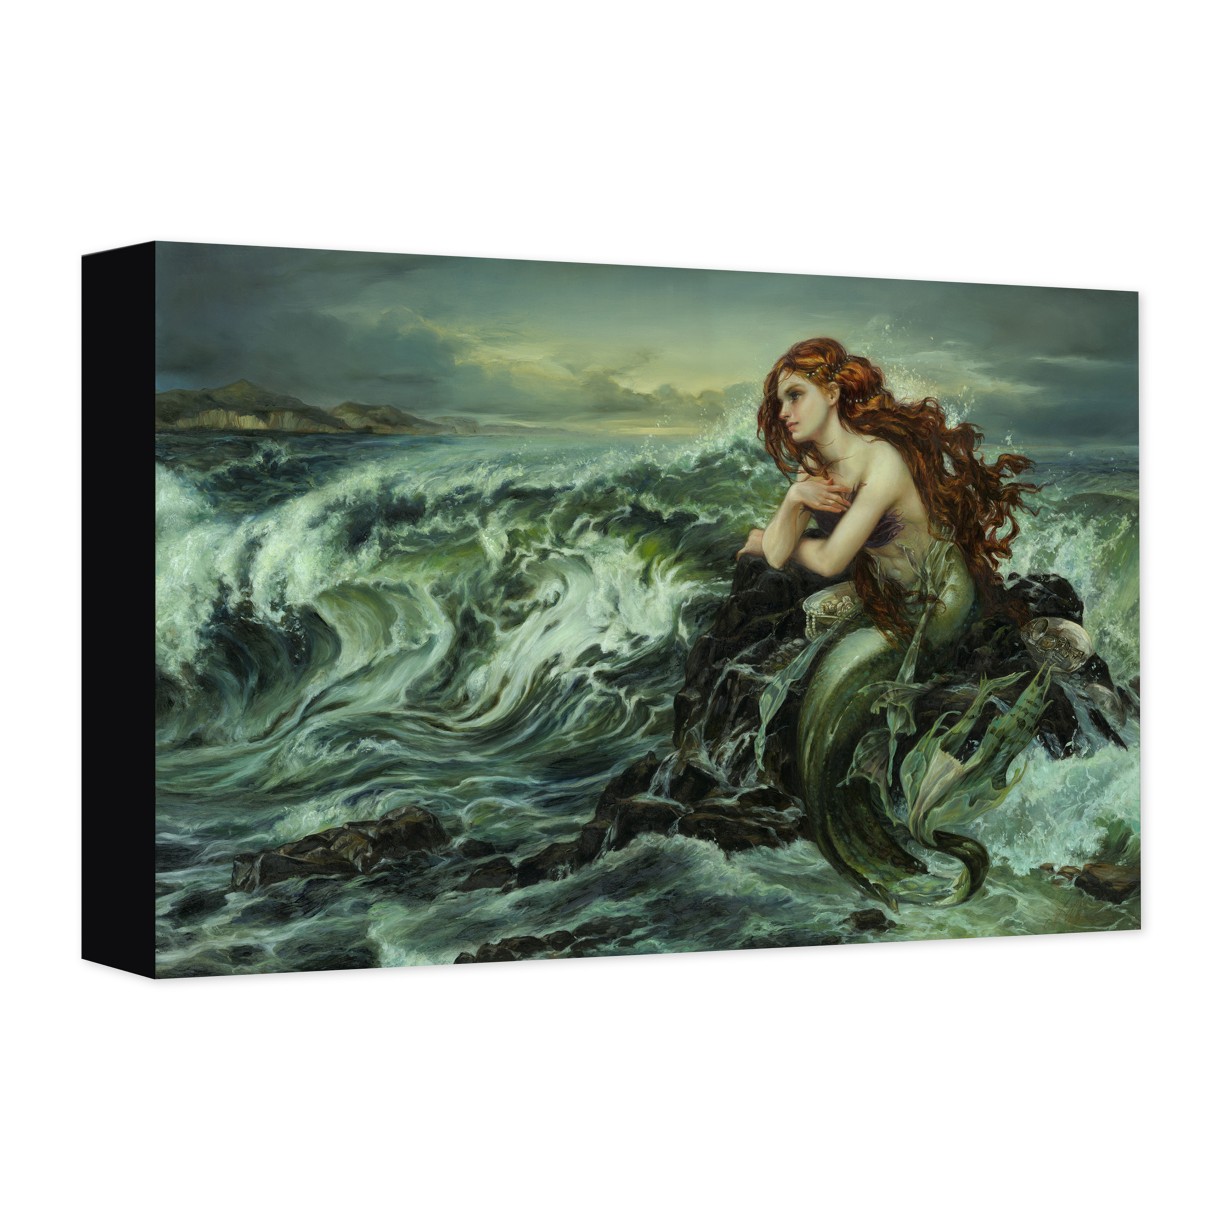 Ariel ''Drawn to the Shore'' Giclée on Canvas by Heather Edwards